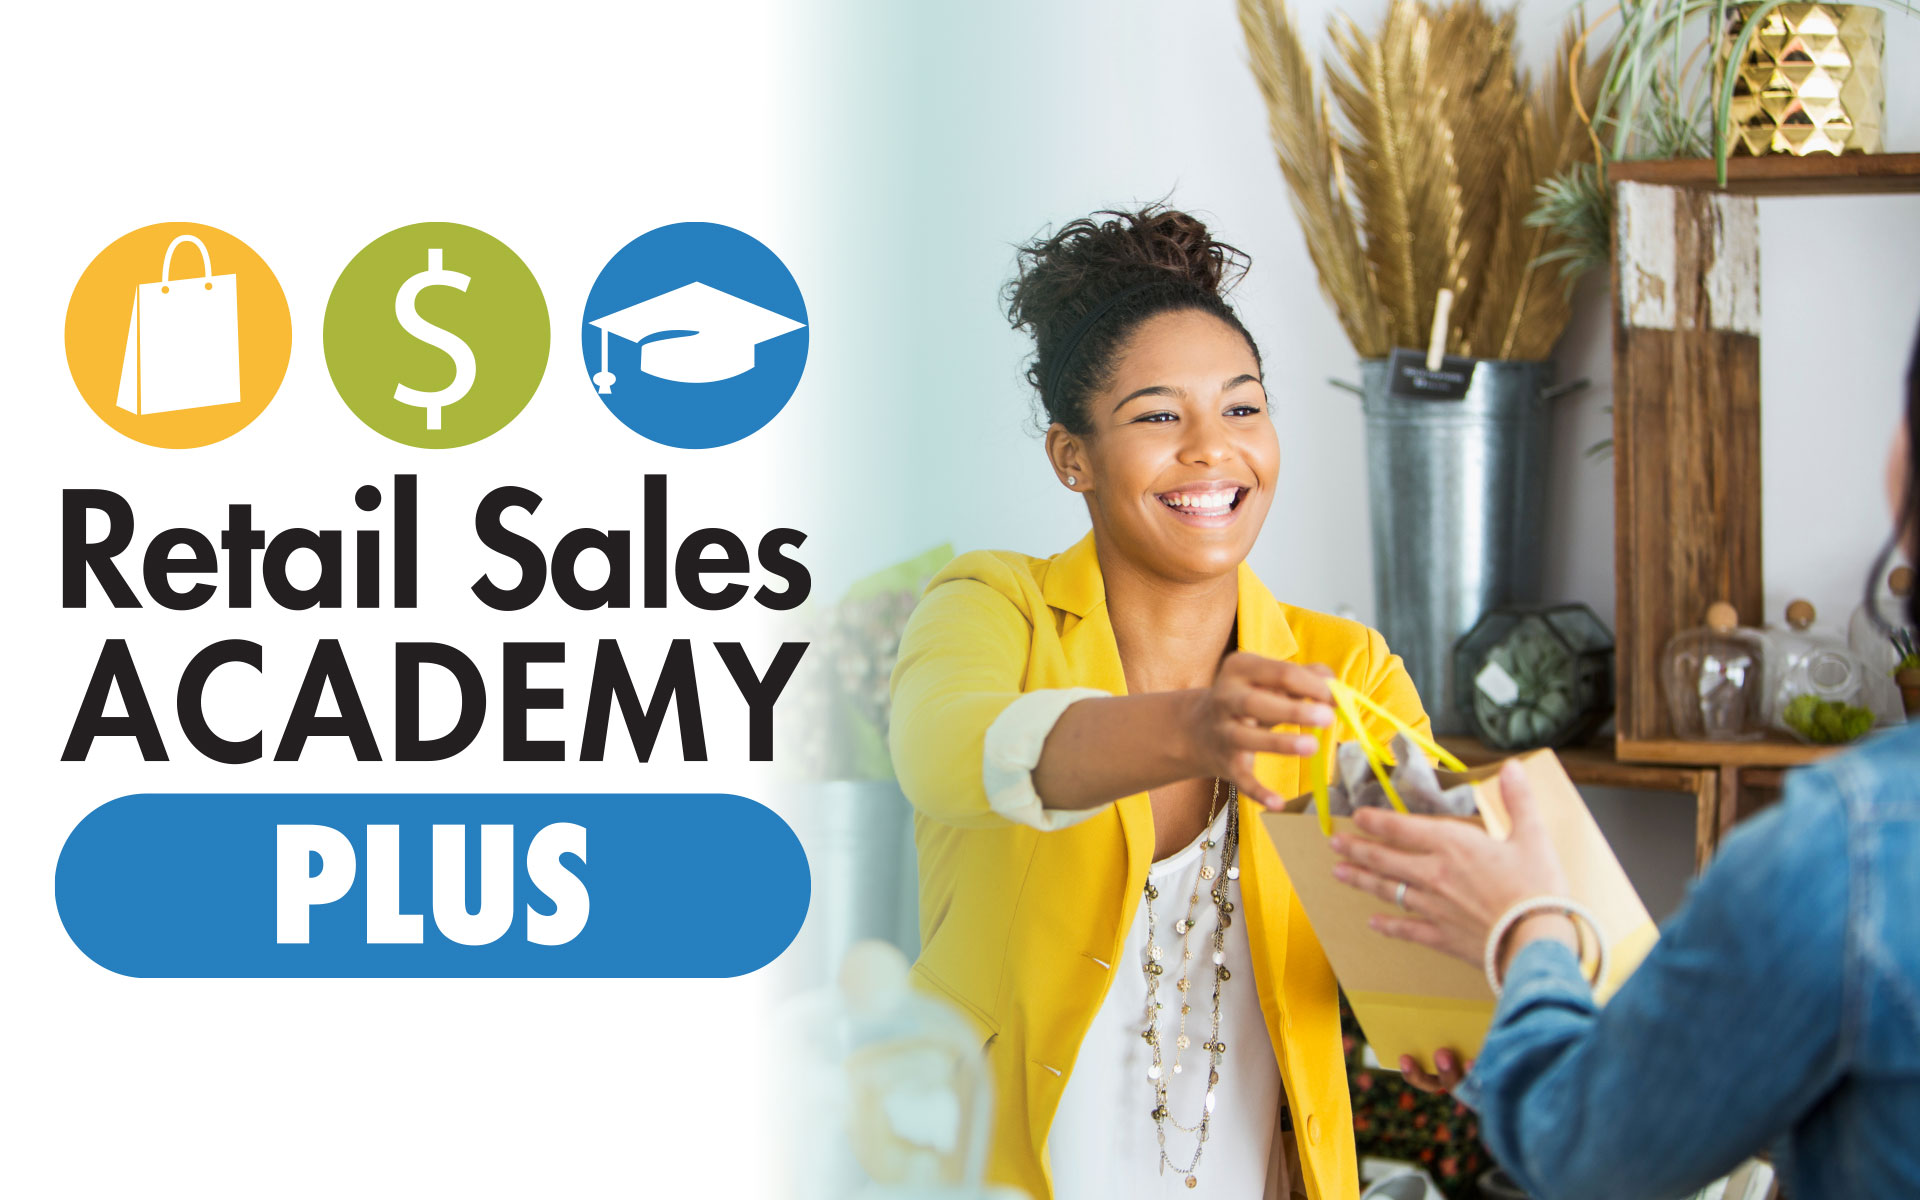 Sales Training for Retail Stores | Retail Sales Academy Plus